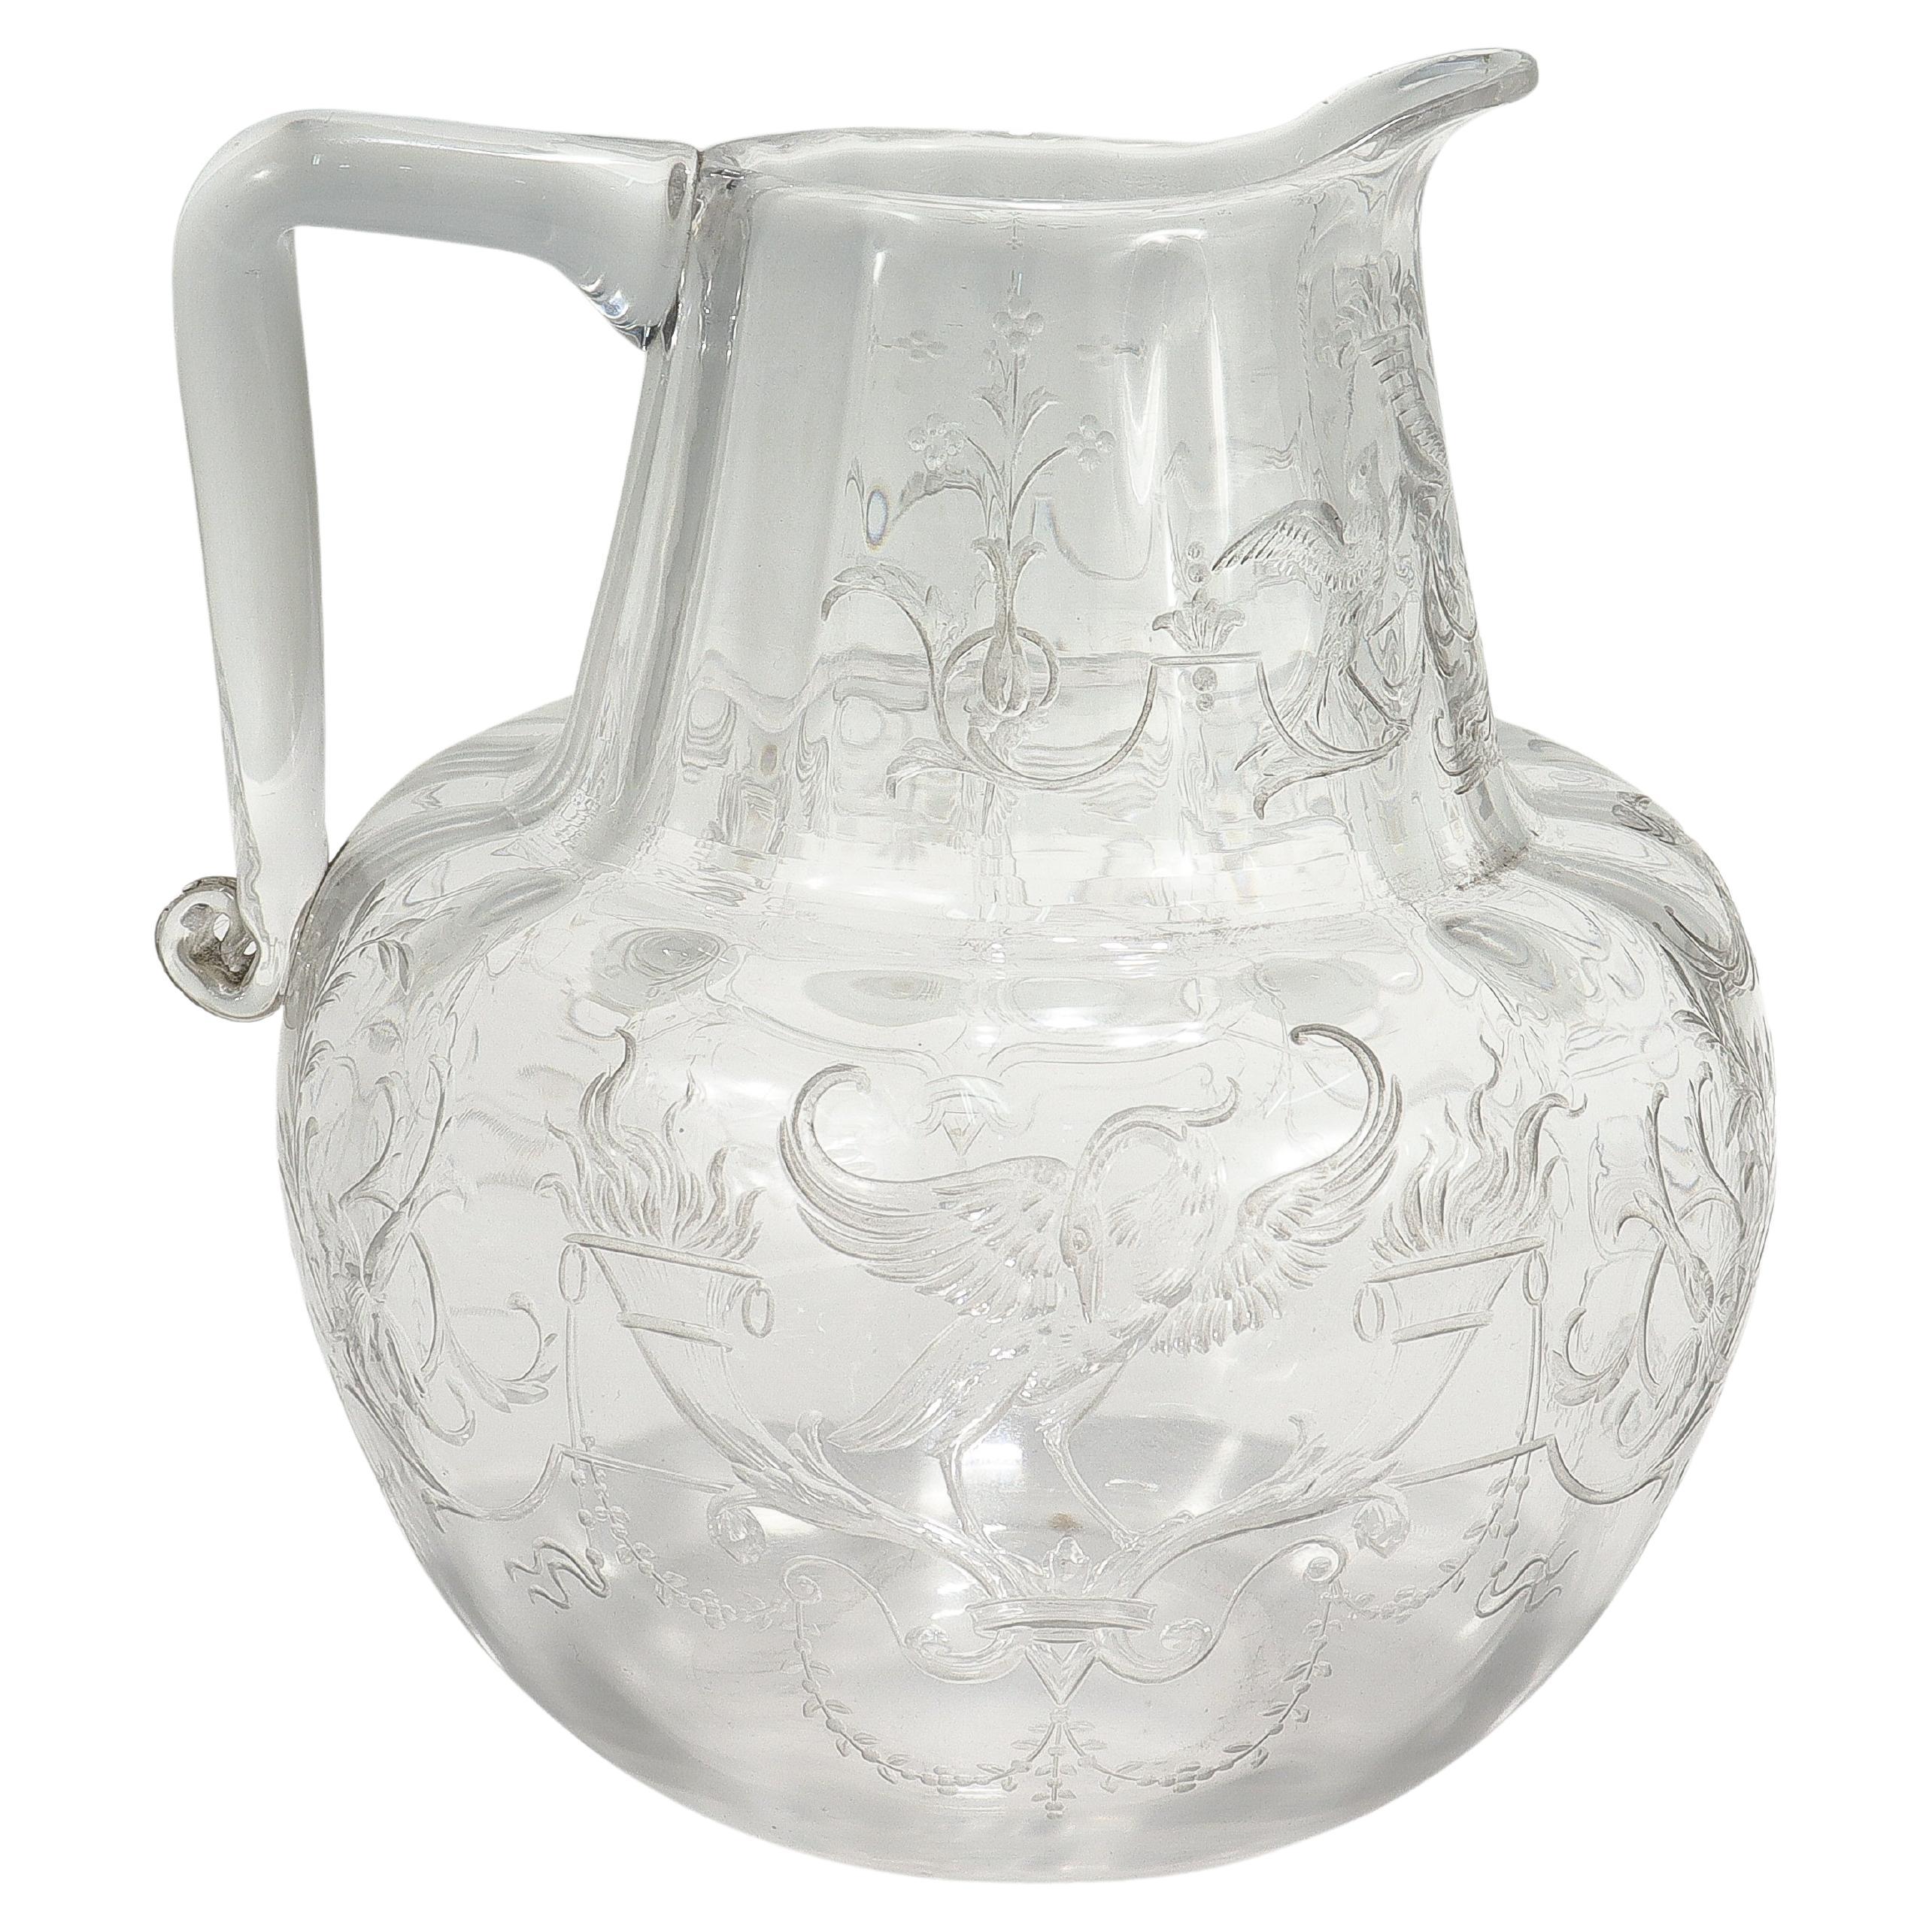 Antique Cut Glass Pitcher with Birds & Phoenix Attributed to Stevens & Williams For Sale